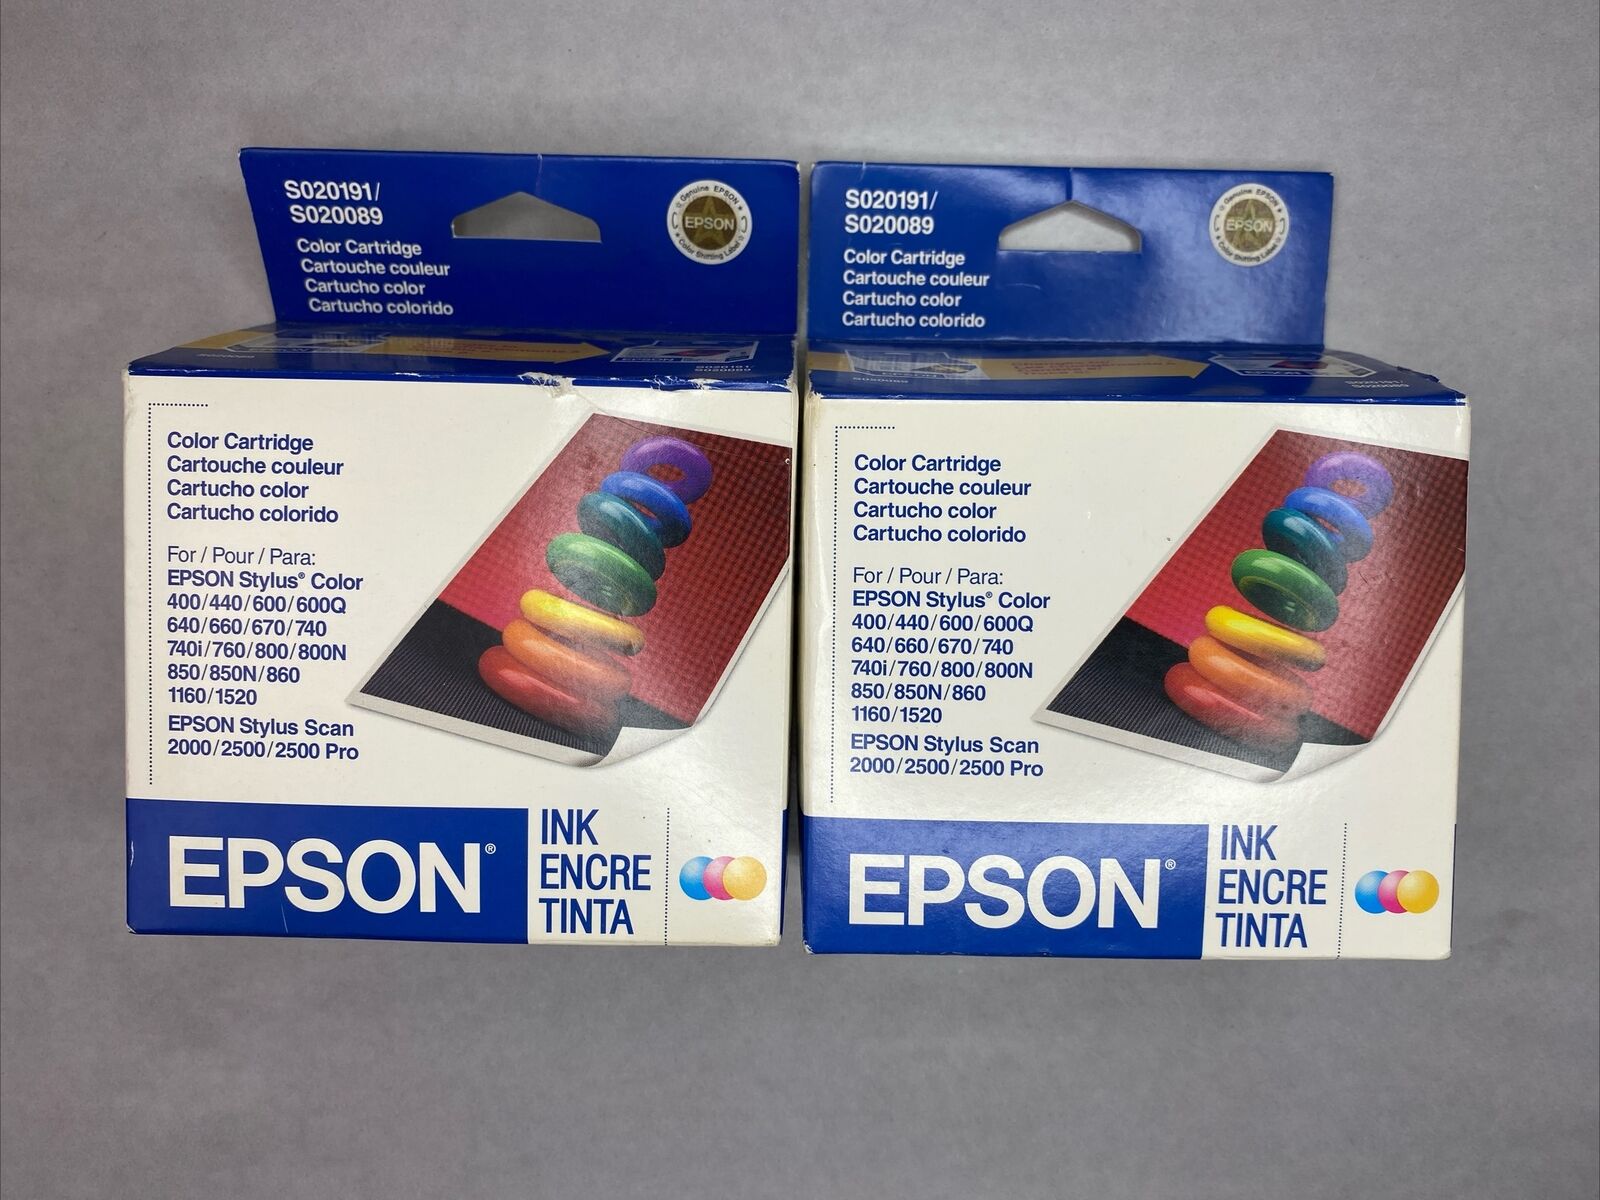 2 Epson Stylus Color Ink Cartridges SO20191/20089 New Old Stock Expired 05/2007